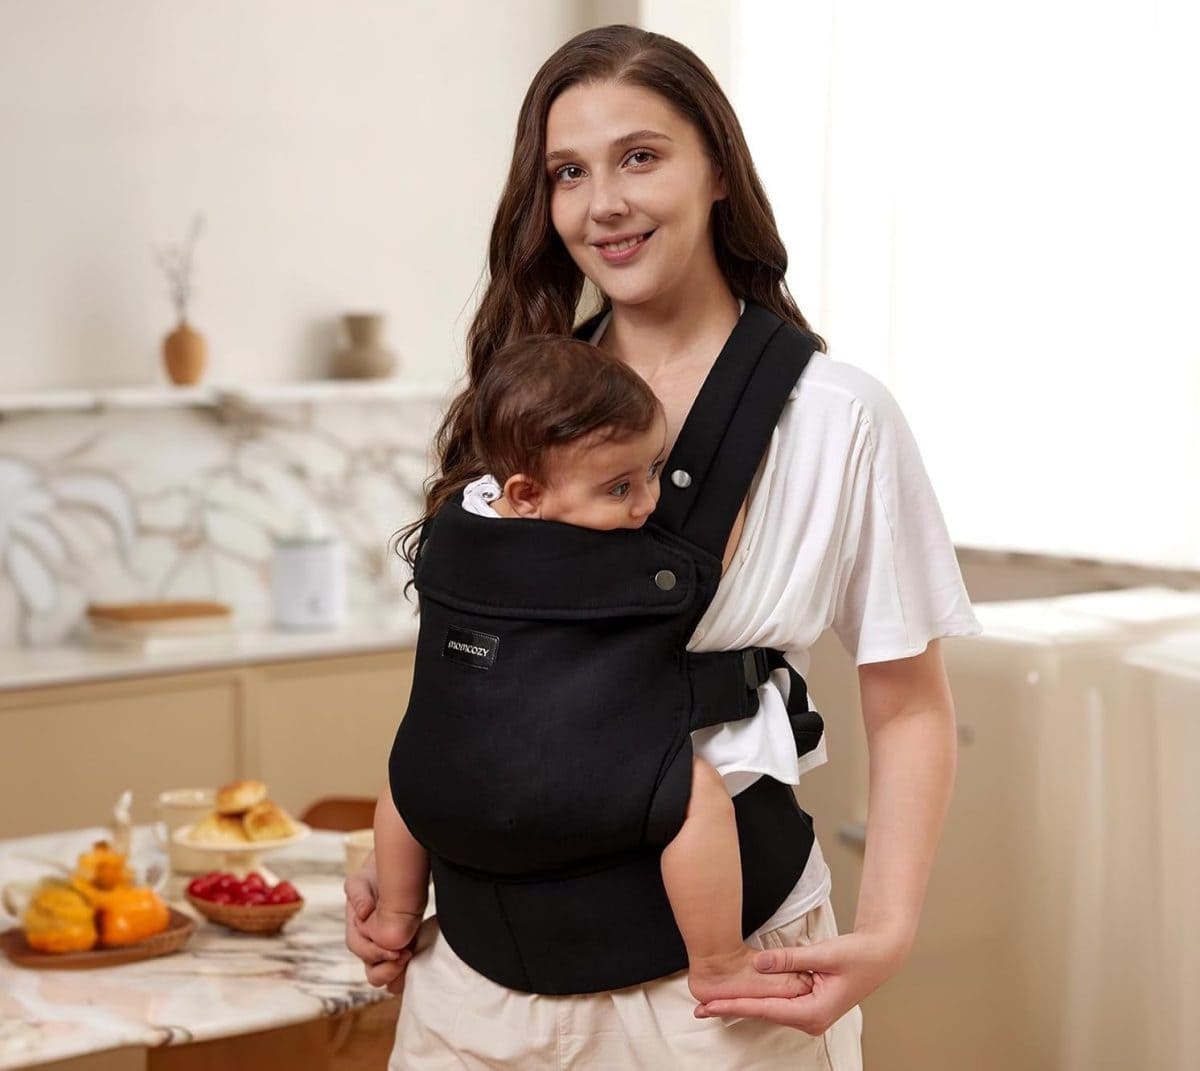 22 Of The Best Gifts For New Parents To Make Life Easier 48 Daily Mom, Magazine For Families